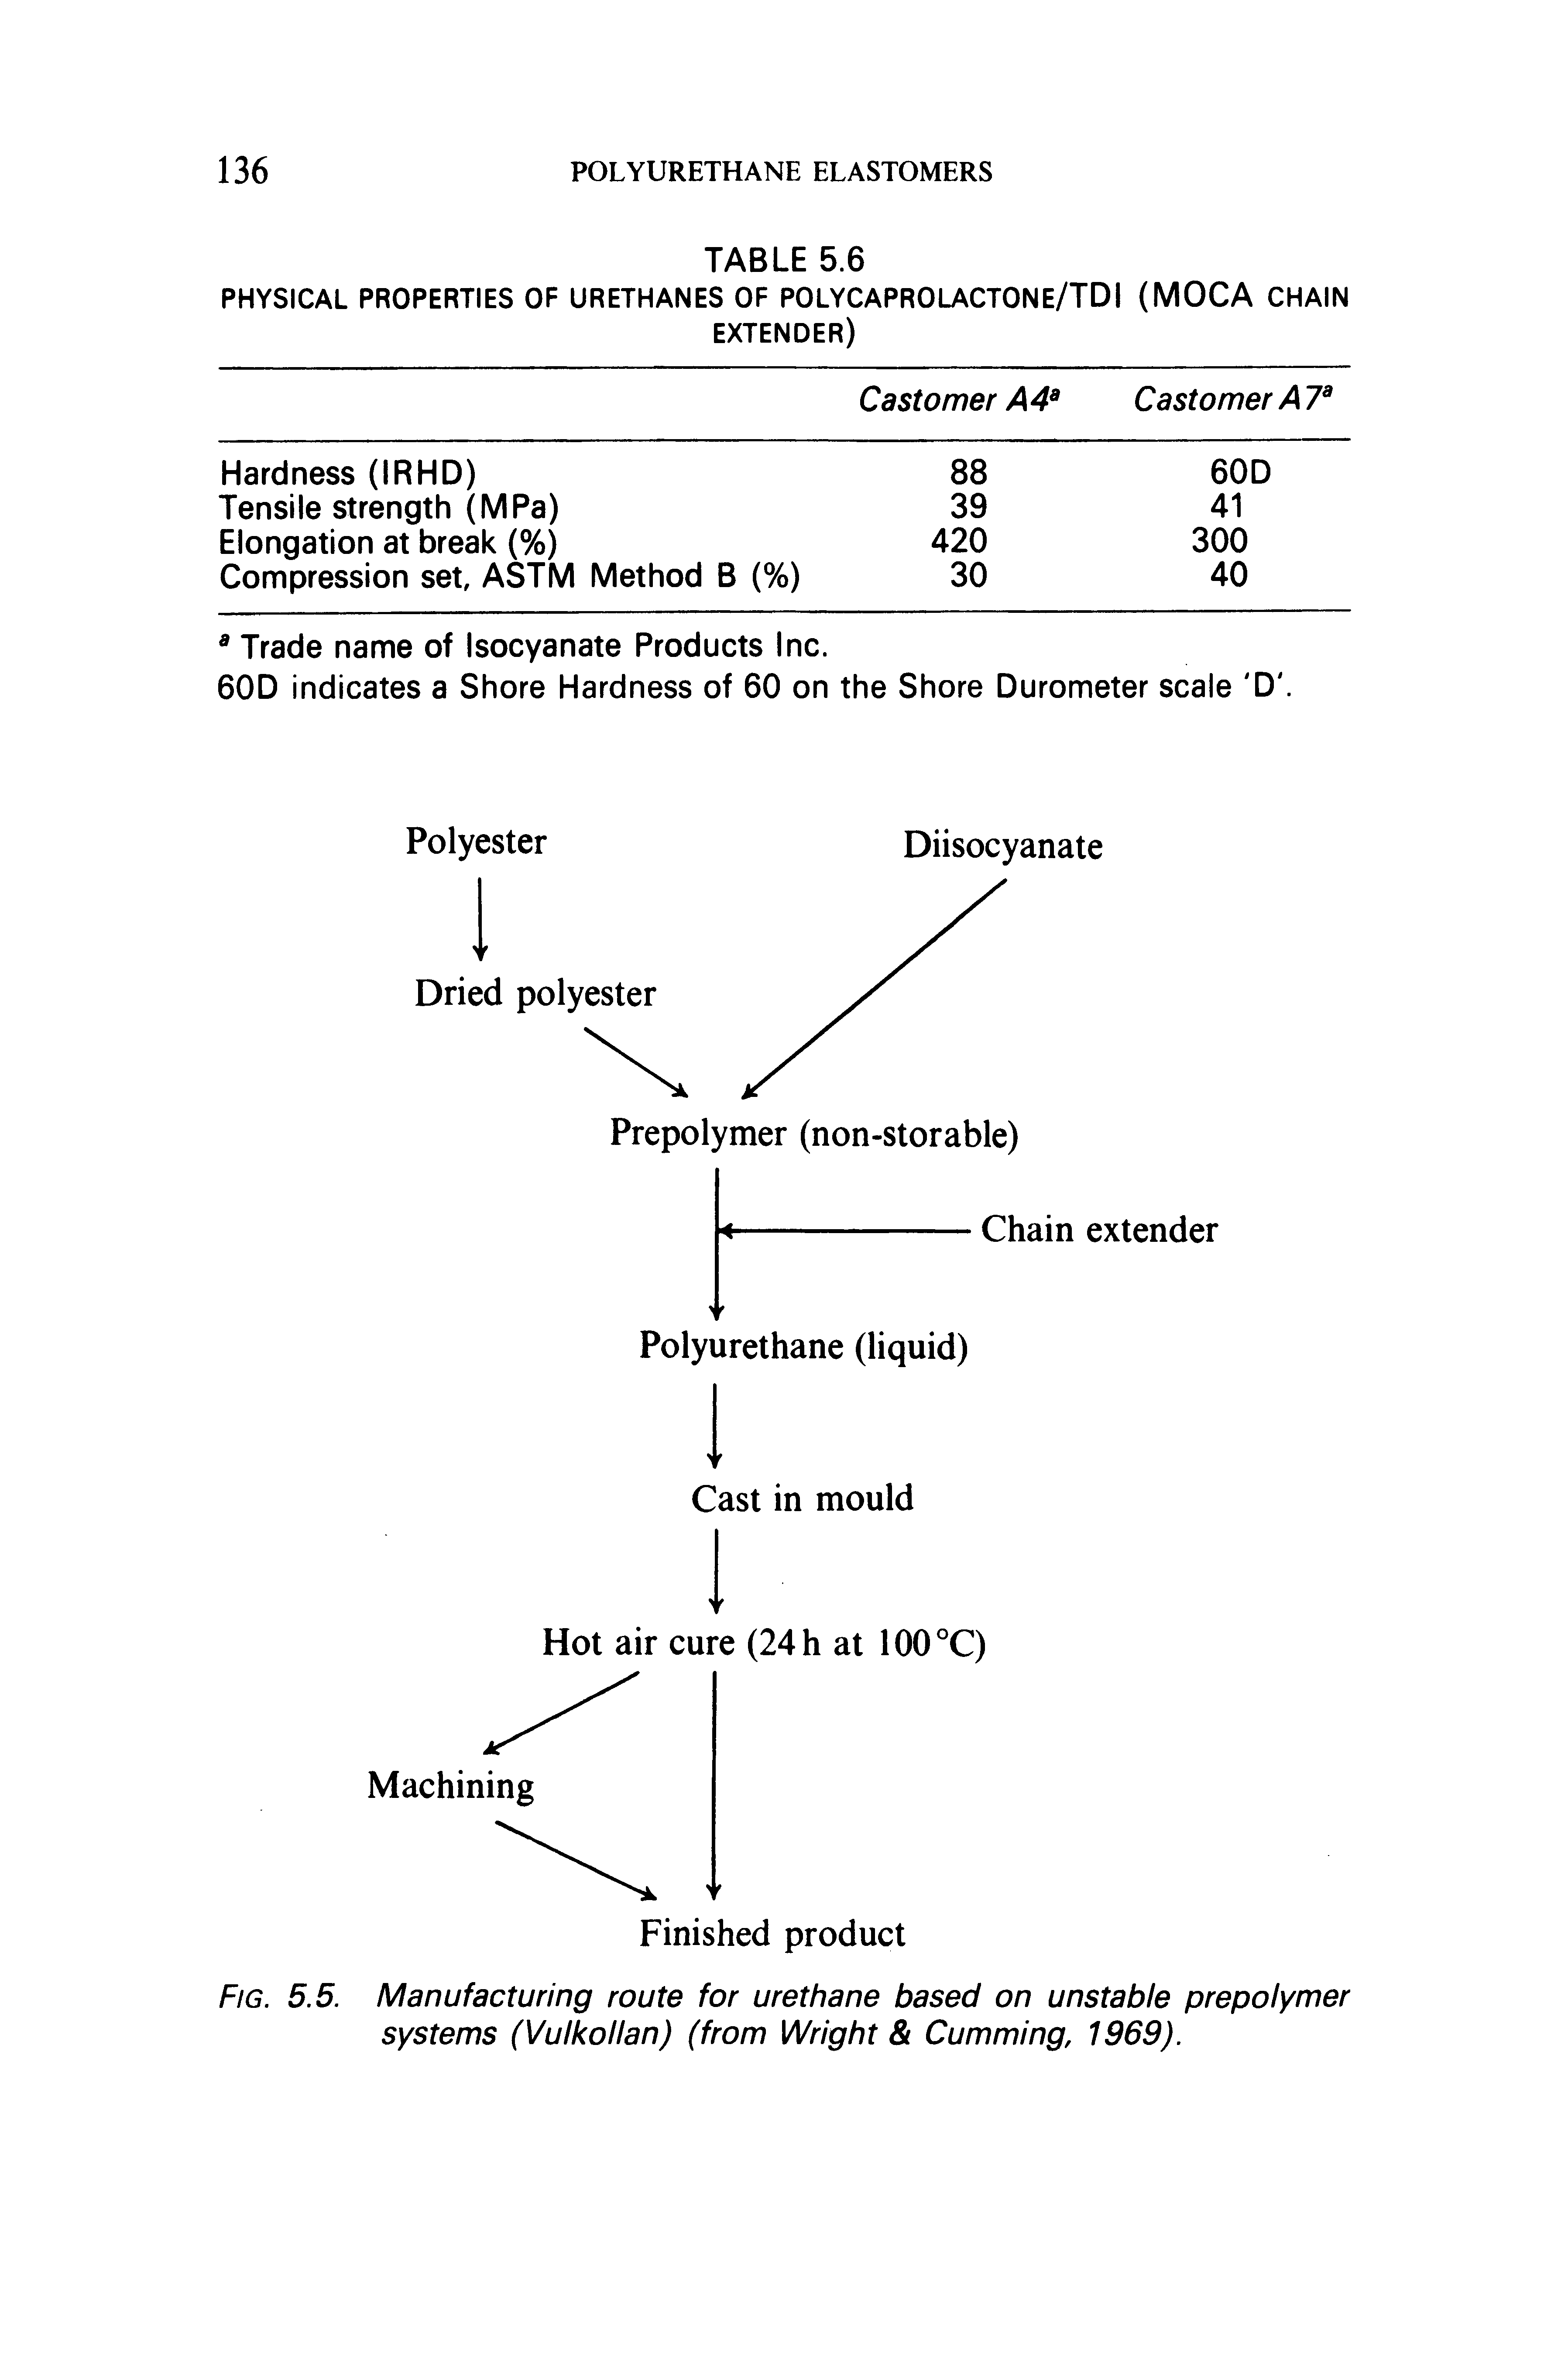 Fig. 5.5. Manufacturing route for urethane based on unstable prepolymer systems (Vulkollan) (from Wright Gumming, 1969).